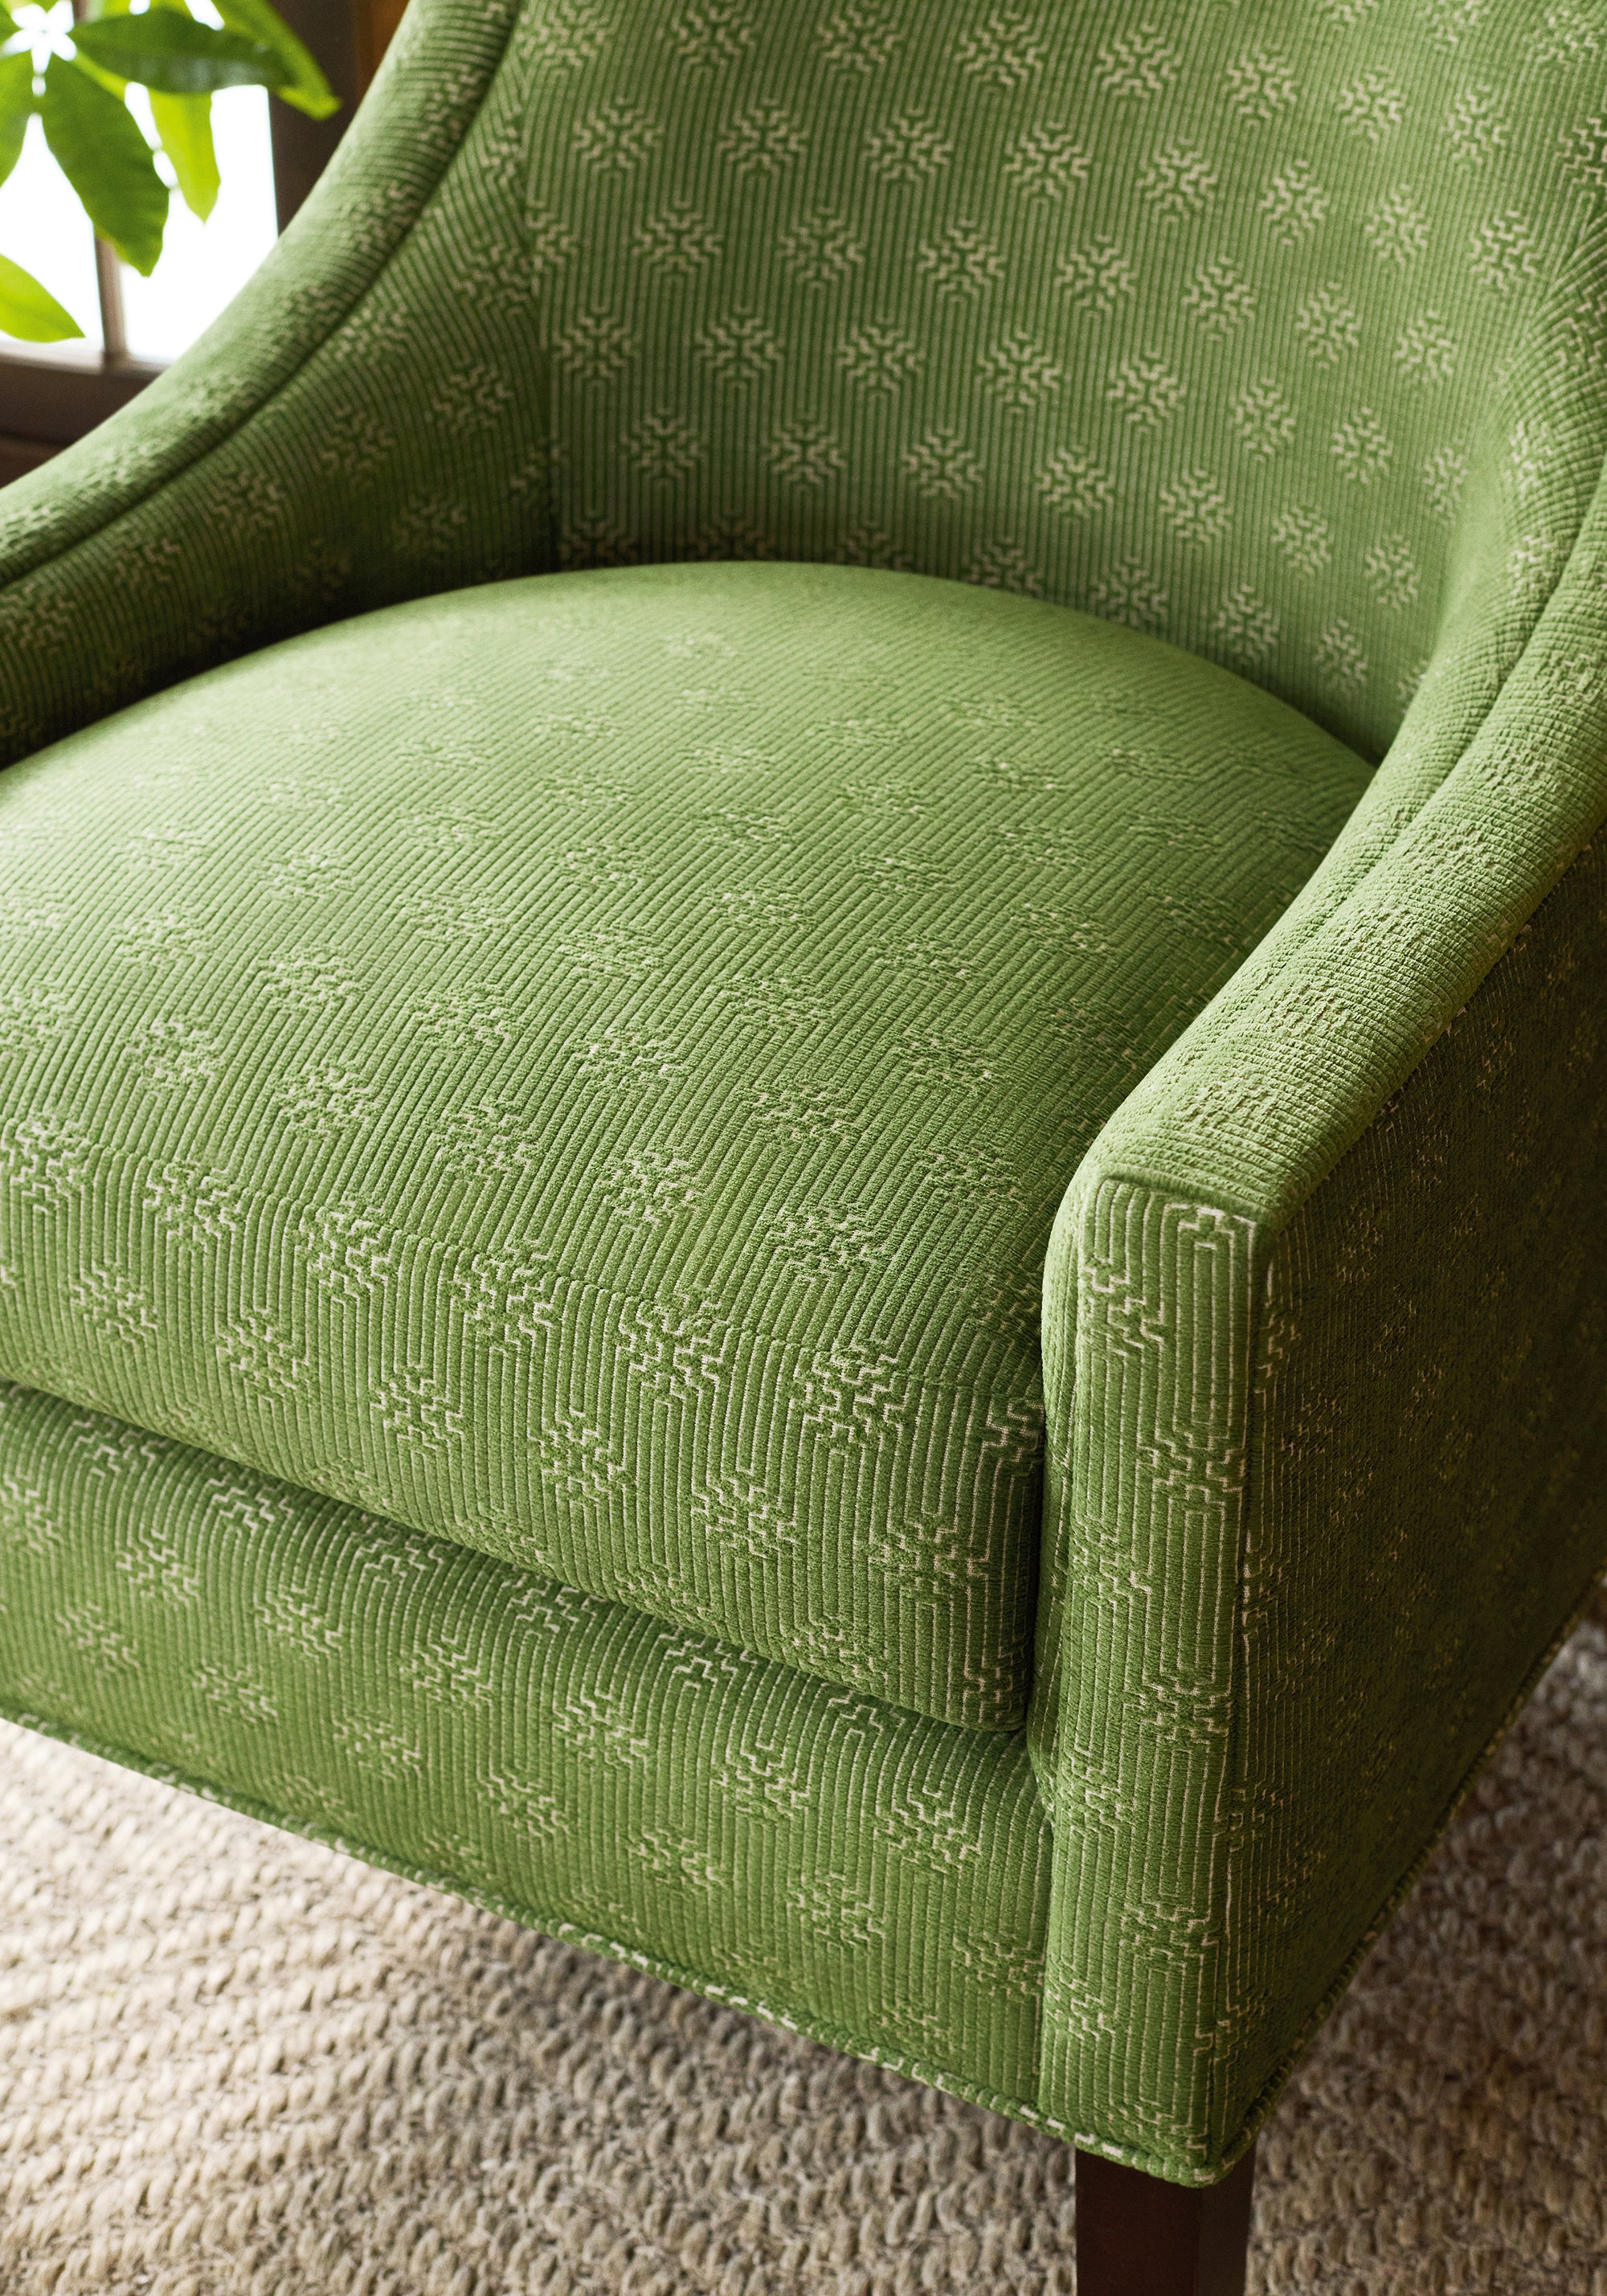 Closeup of everett chair in Crete woven fabric in olive color - pattern number W74211 - by Thibaut fabrics